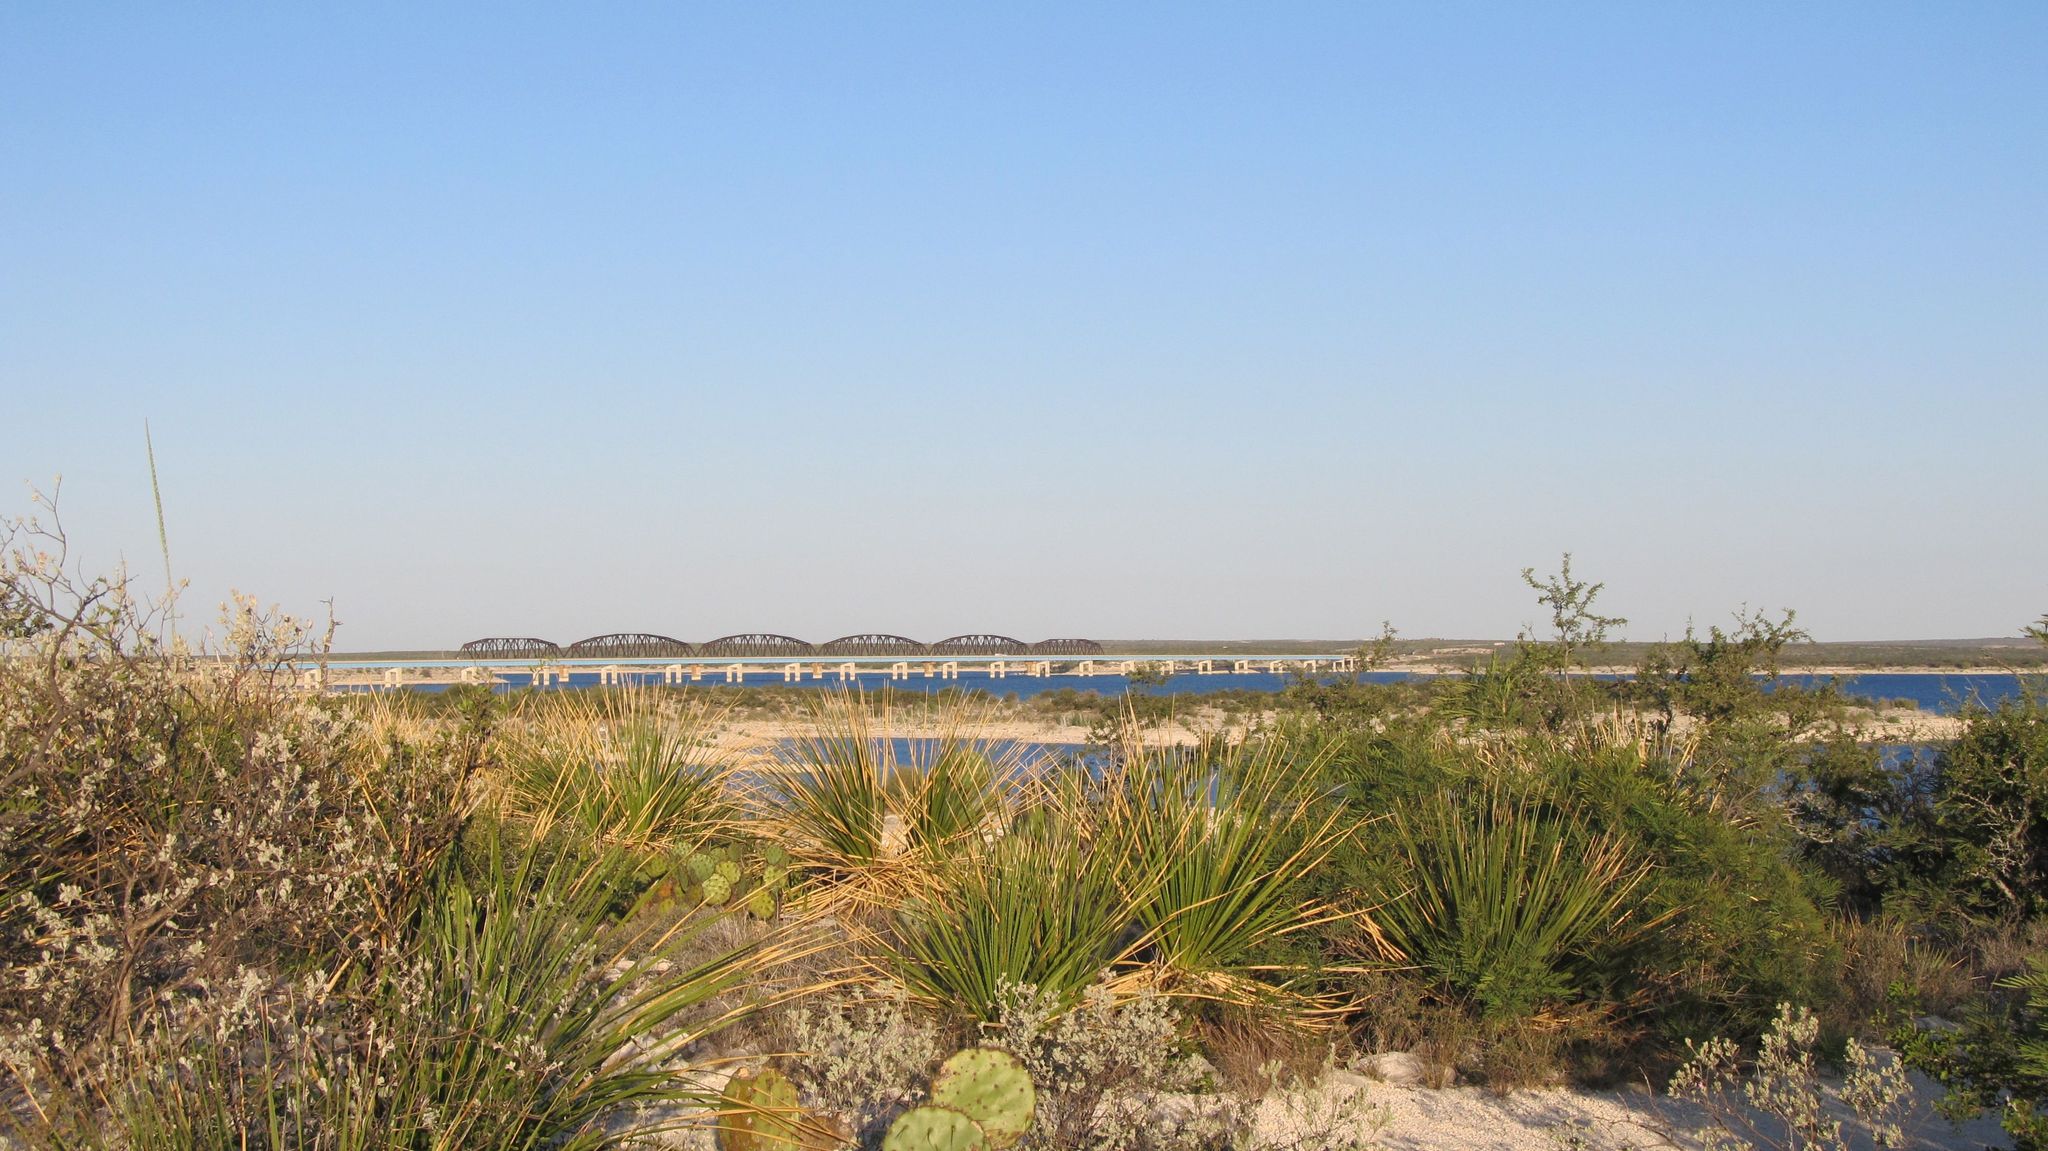 Blue skies and blue waters are common at Amistad National Recreation Area